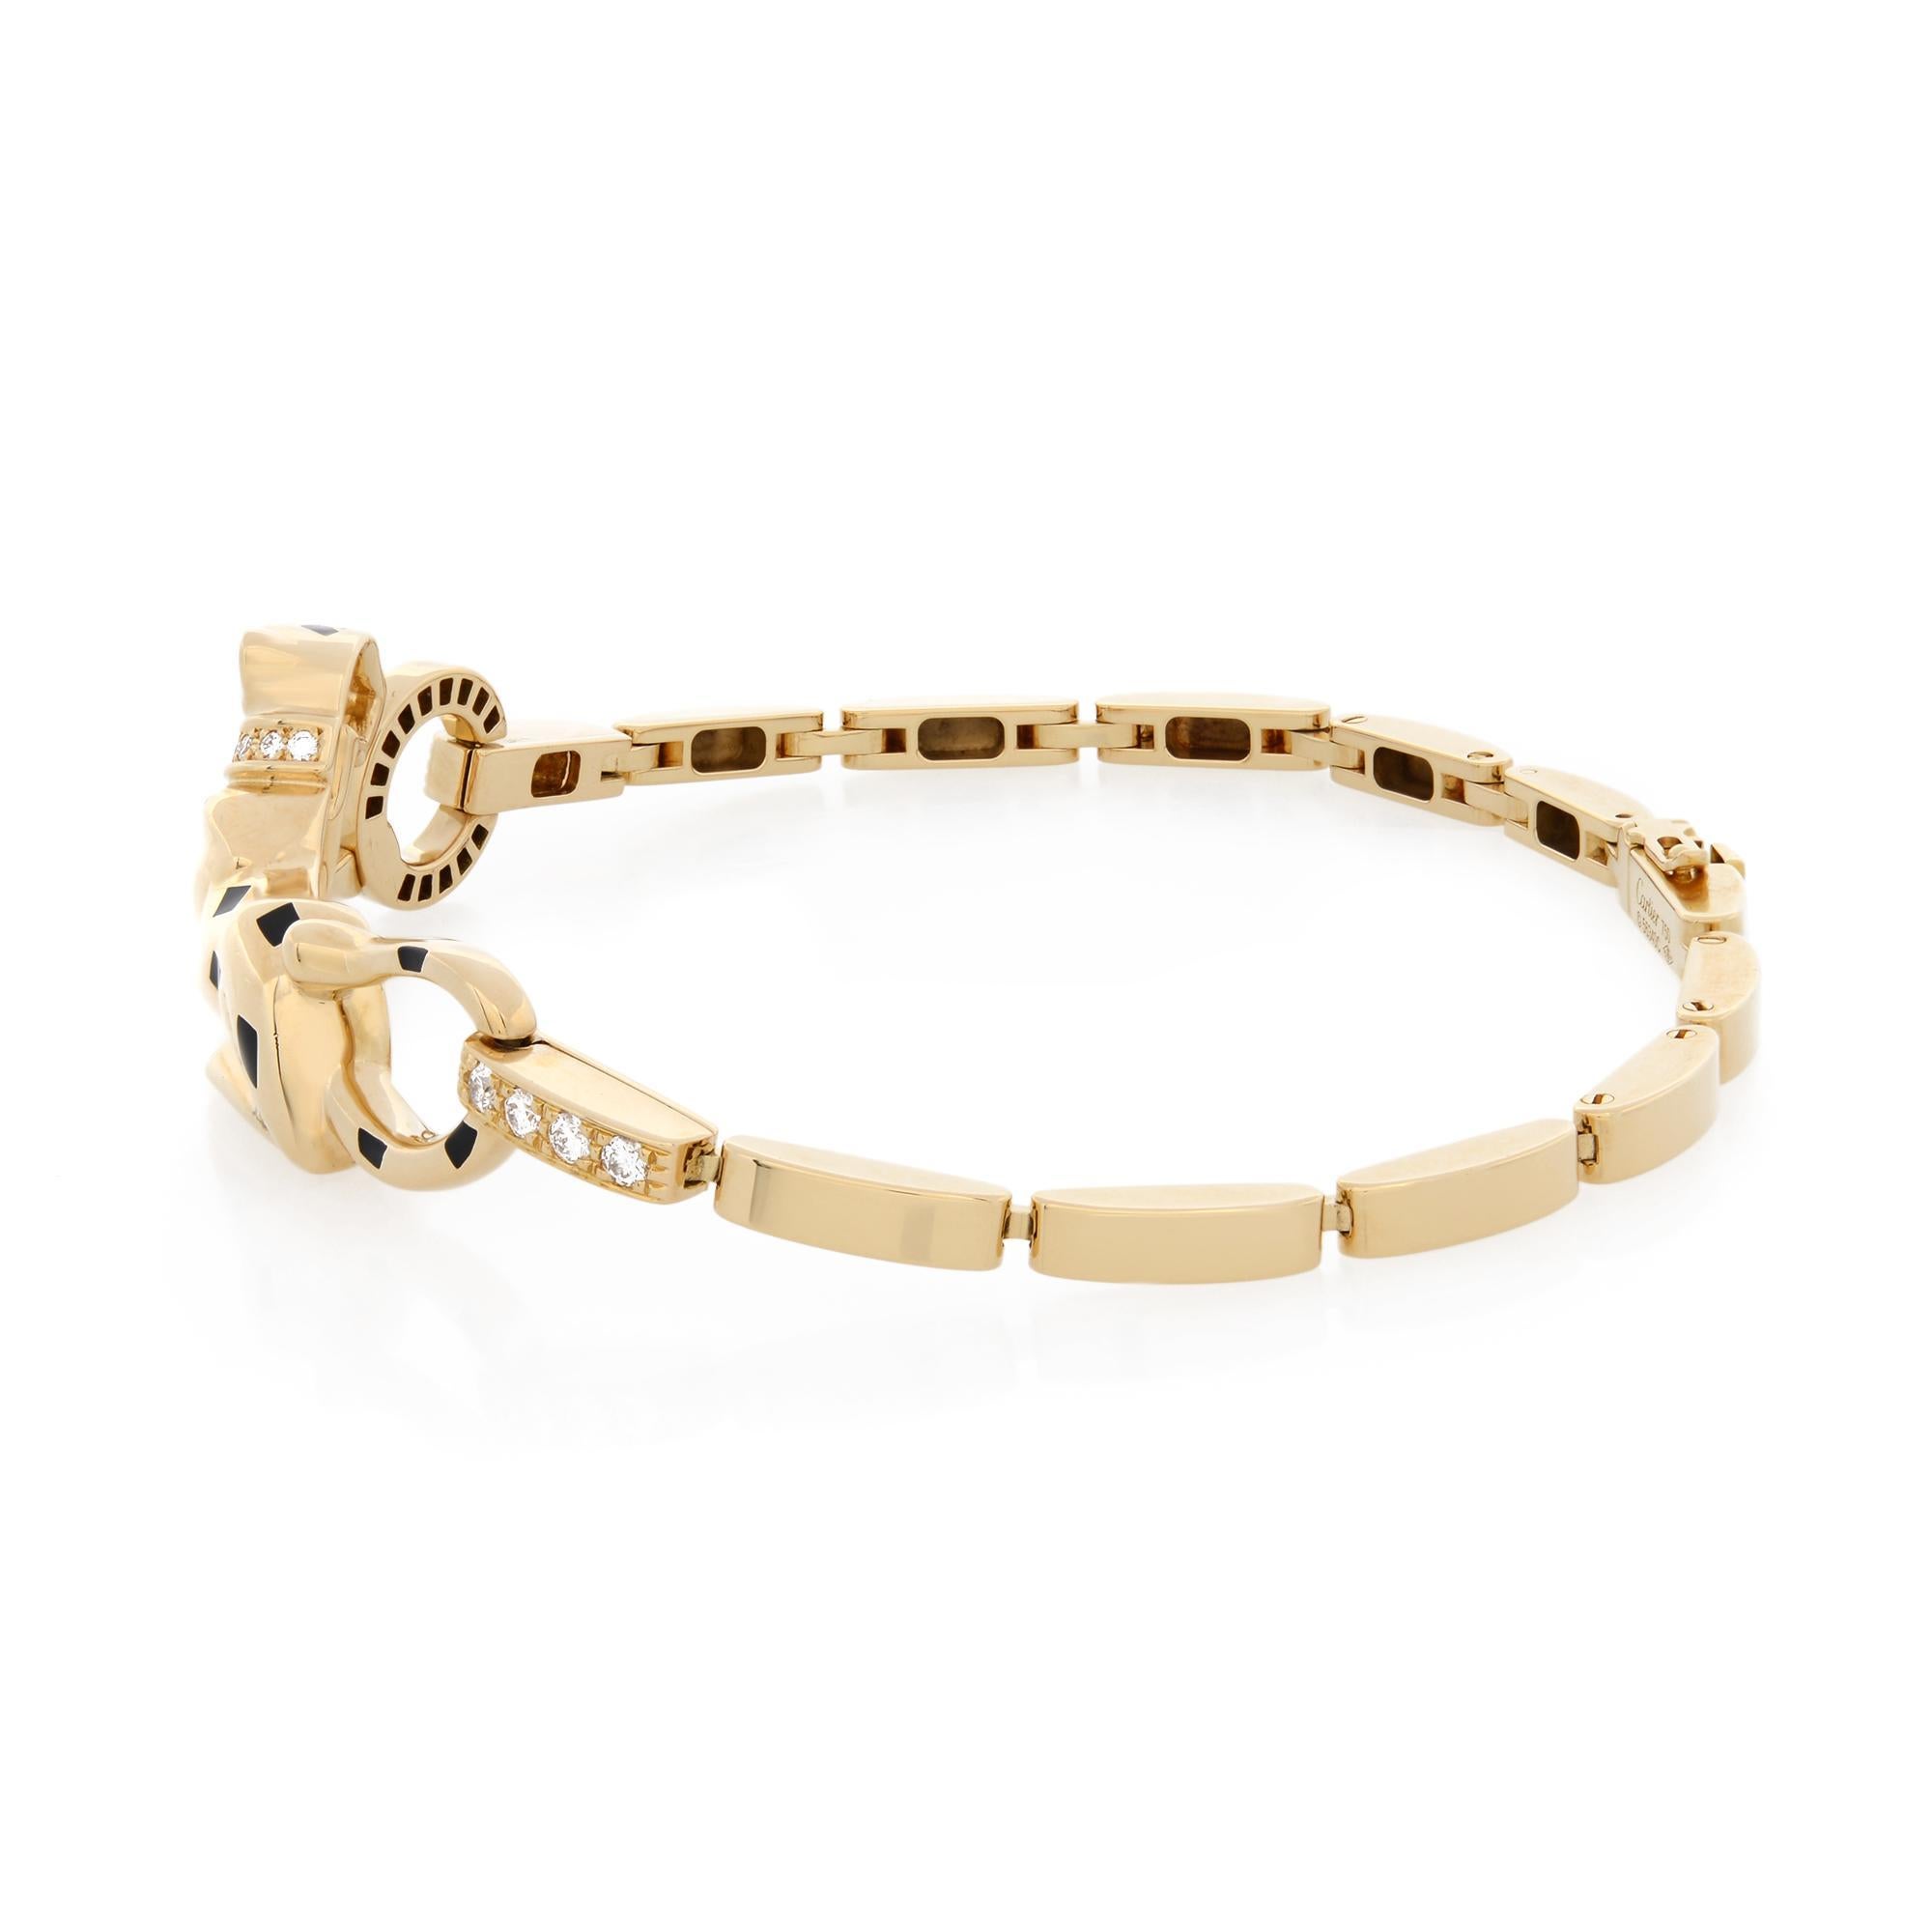 An iconic Cartier Panthere de Cartier bracelet in 18K yellow gold. This bracelet features 31 brilliant cut glittering diamonds weighing 0.26 carats encrusting the Panthere's neck and connecting rings. The eyes are set with tsavorite garnet stones